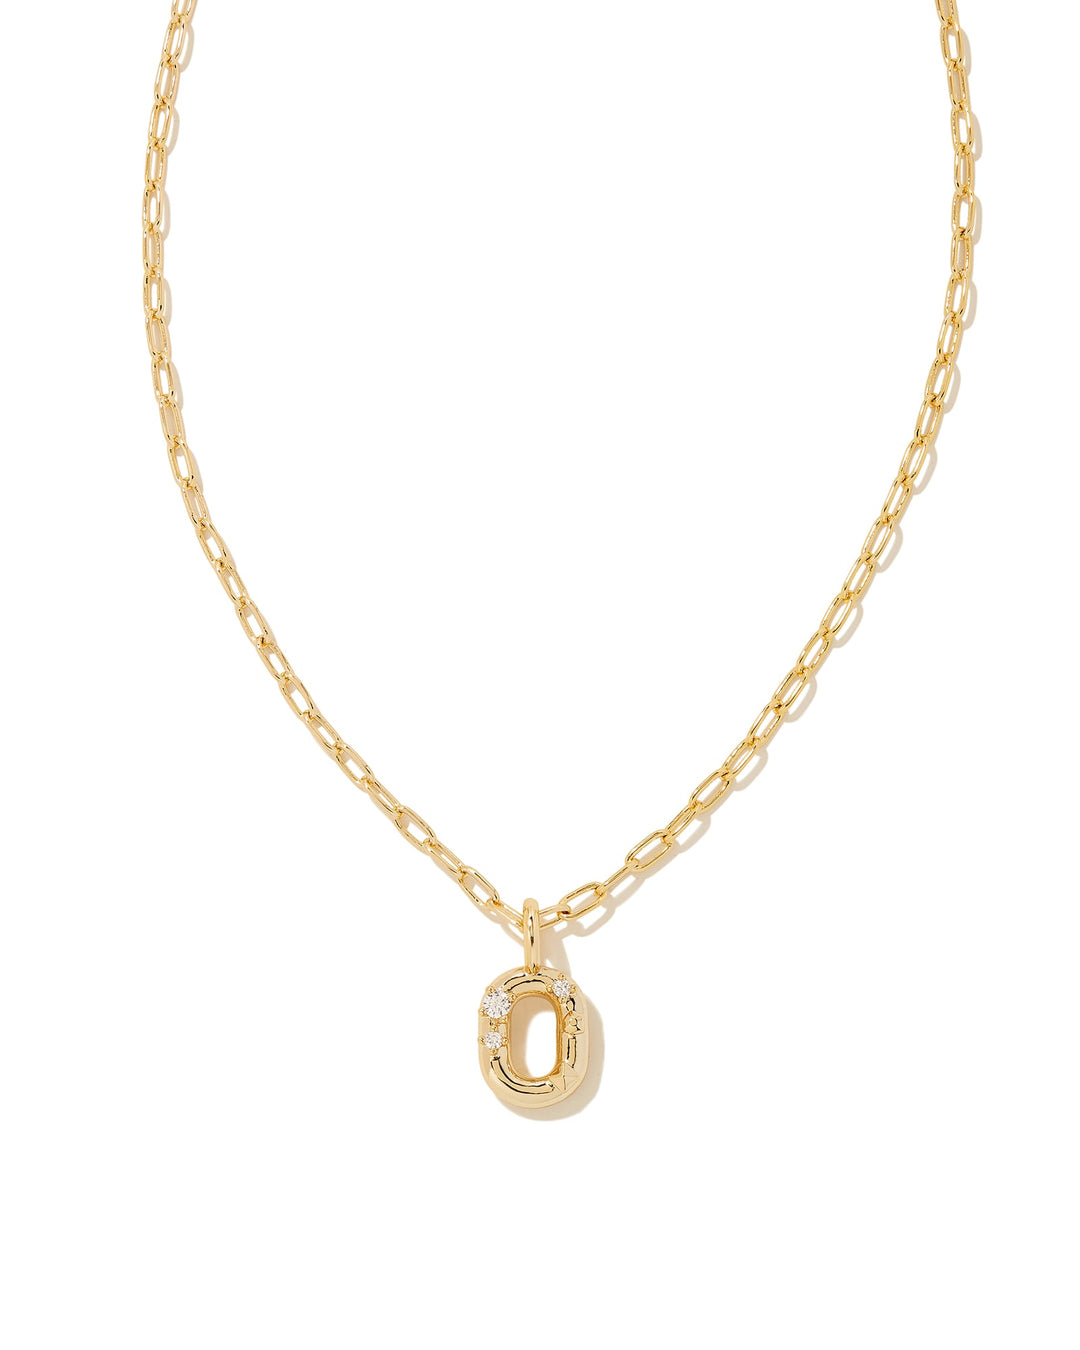 CRYSTAL LETTER O SHORT PENDANT INITIAL NECKLACE - GOLD WHITE CZ